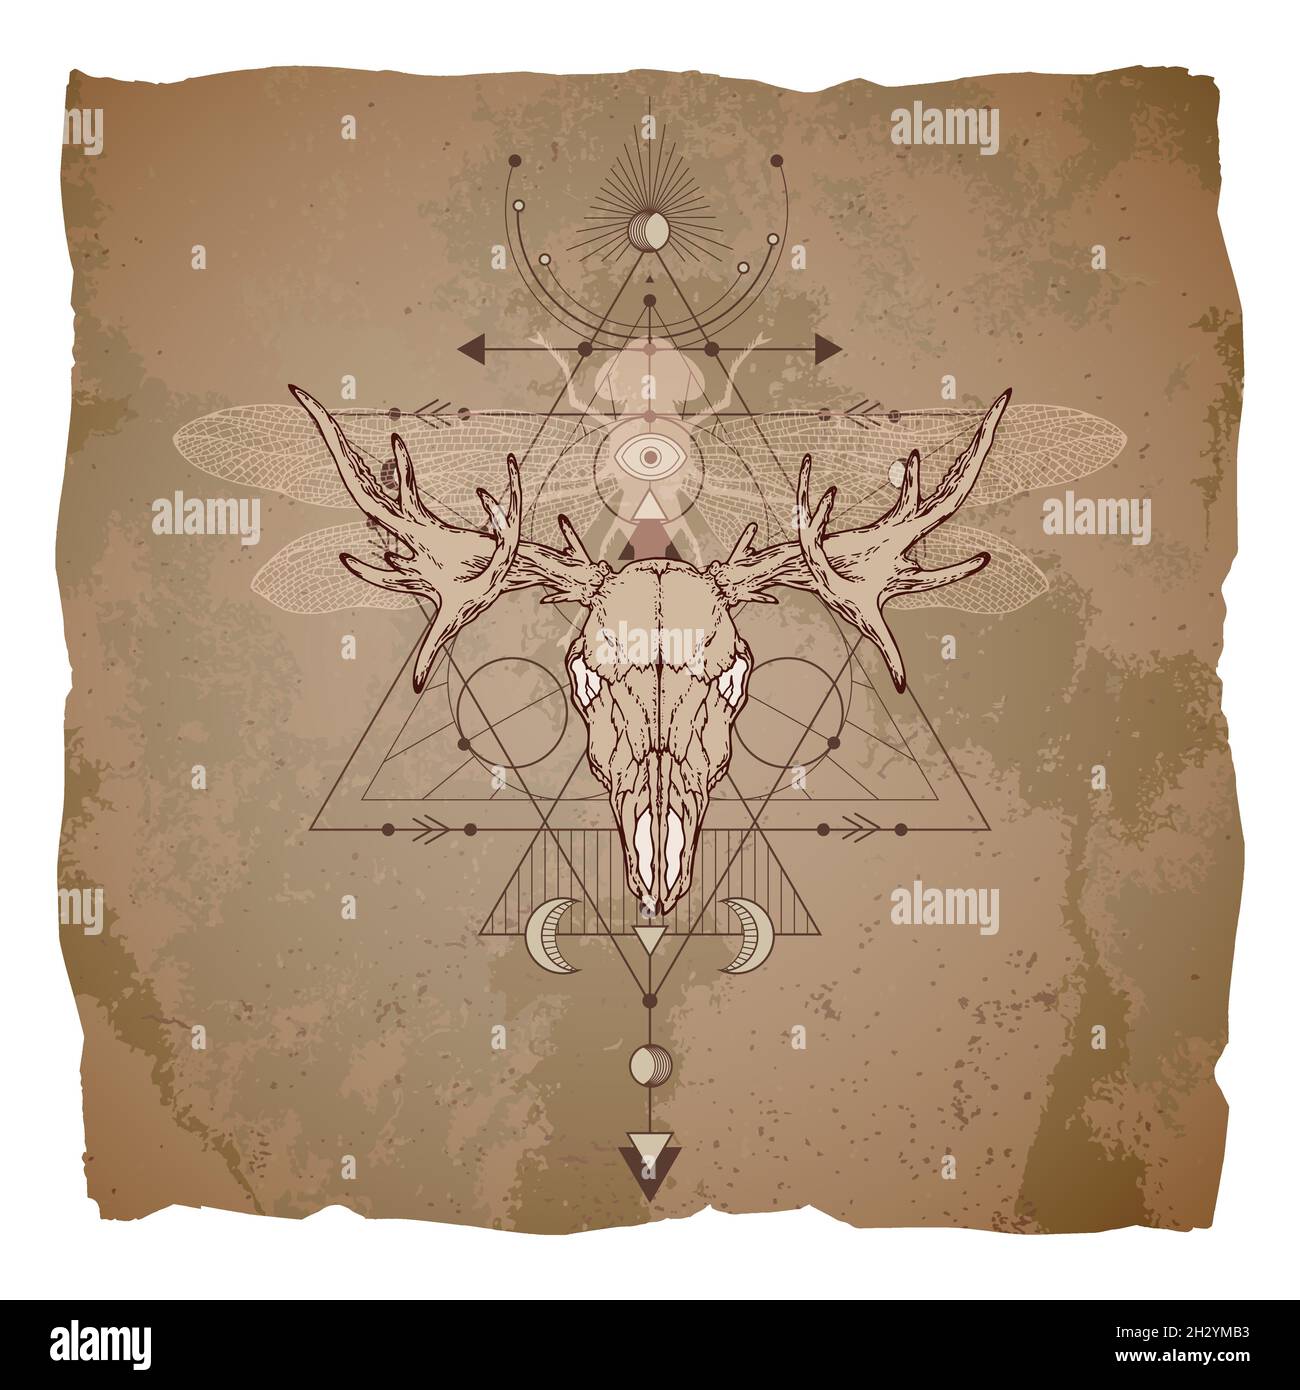 Vector illustration with hand drawn moose skull, dragonfly and Sacred geometric symbol on vintage paper background with torn edges. Abstract mystic si Stock Vector